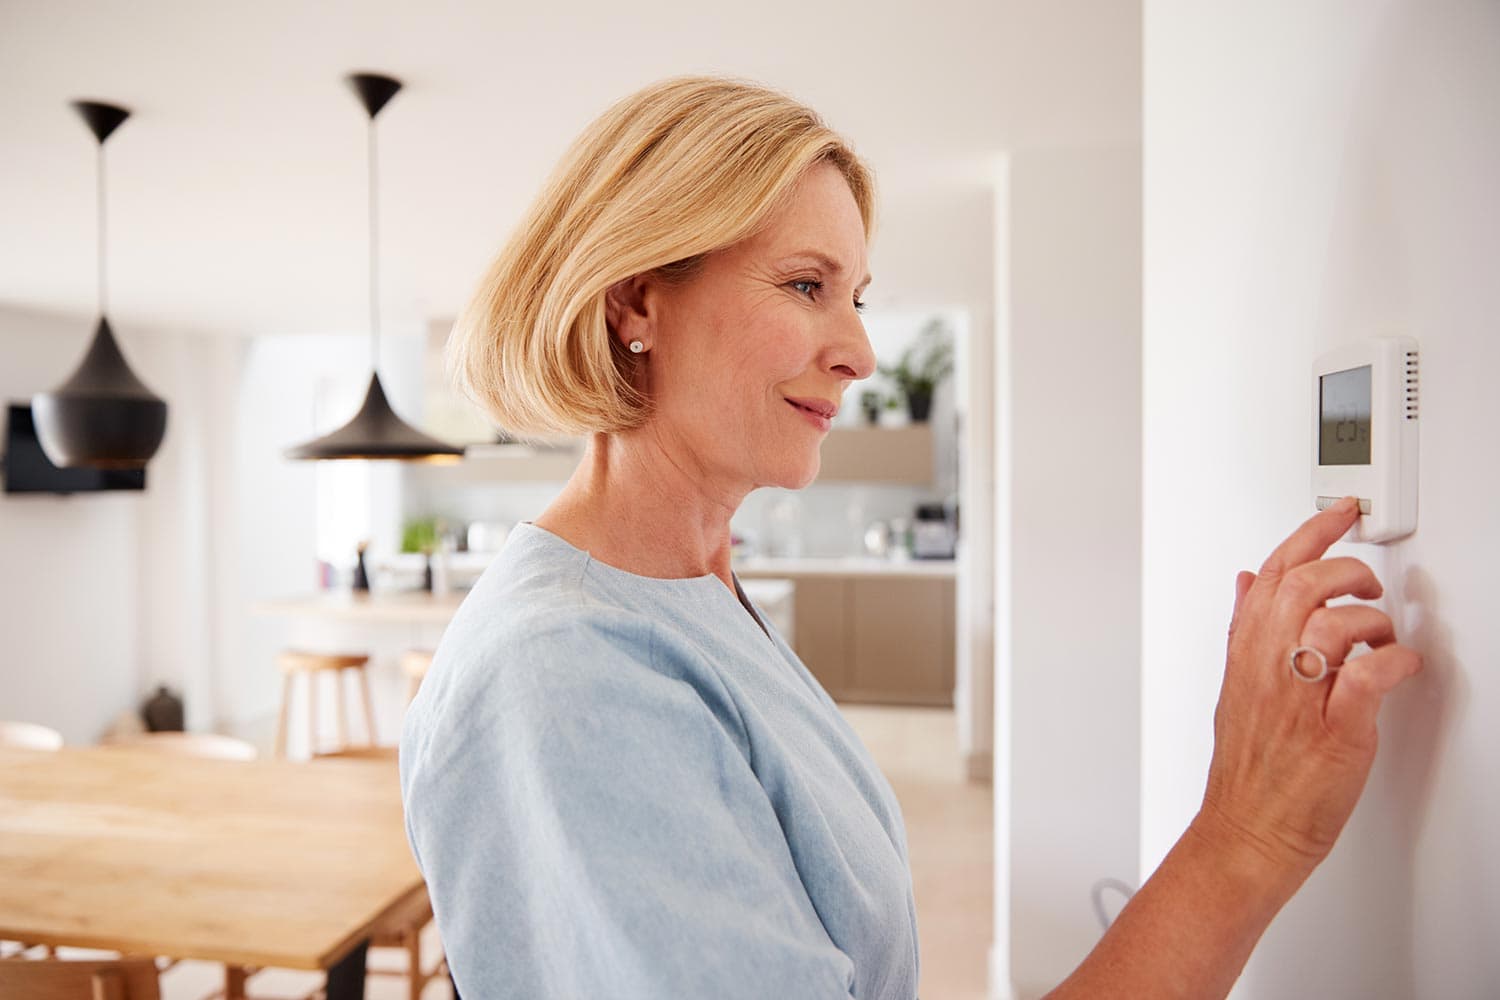 Mature woman adjusting central heating temperature at home on thermostat